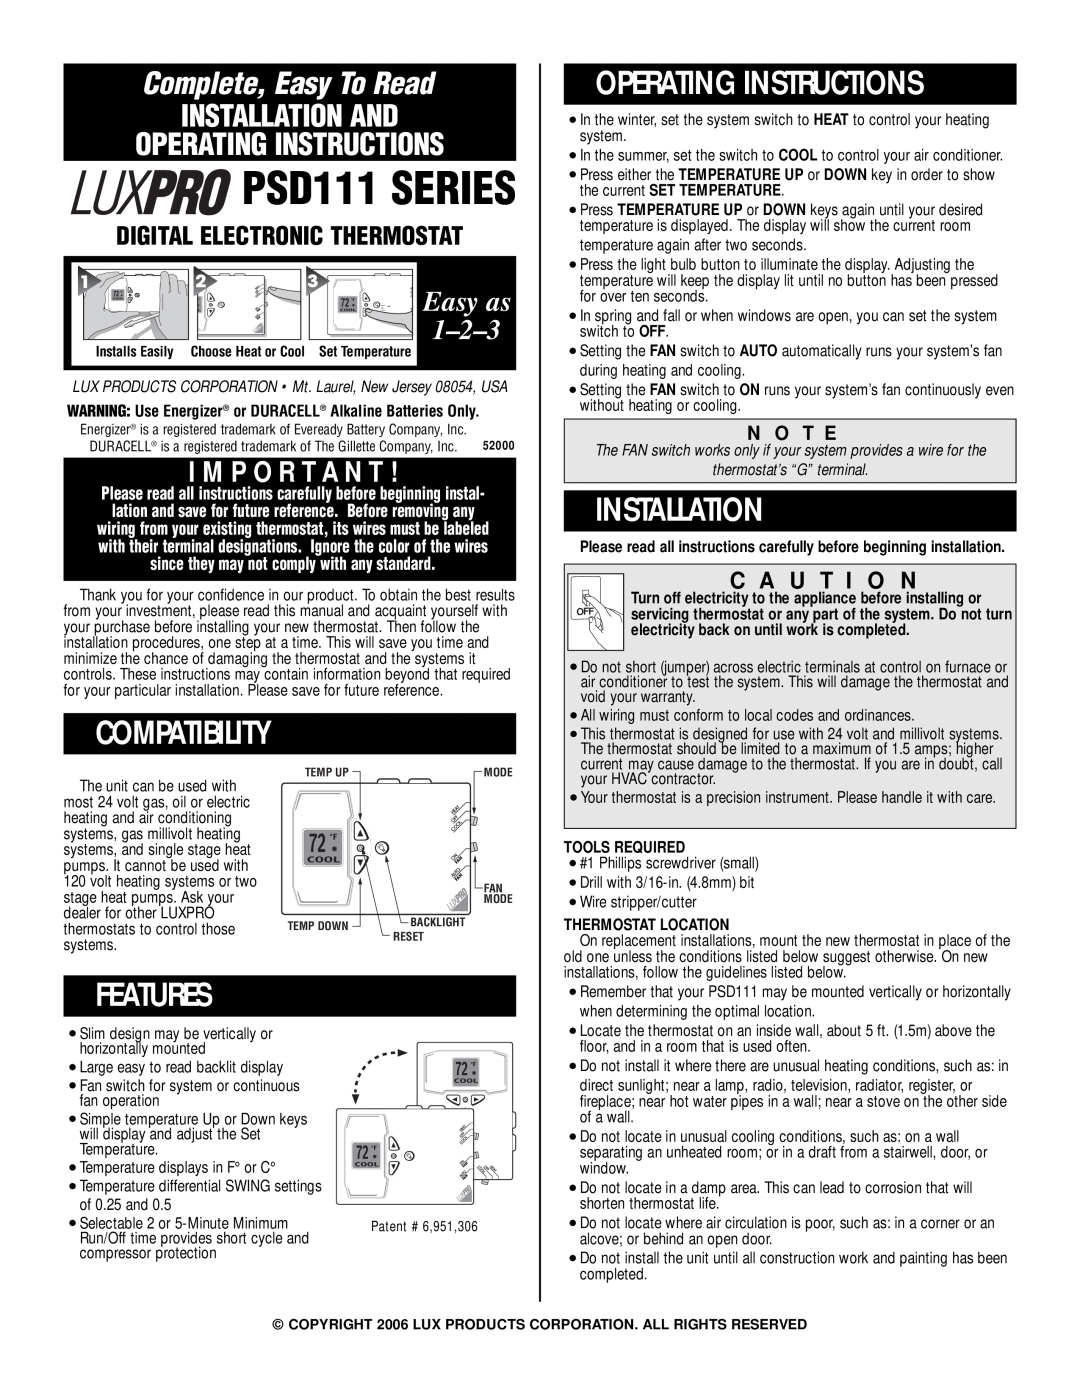 Lux Products PSD111 operating instructions Operating Instructions, Installation, Features, N O T E, C A U T I O N, Easy as 